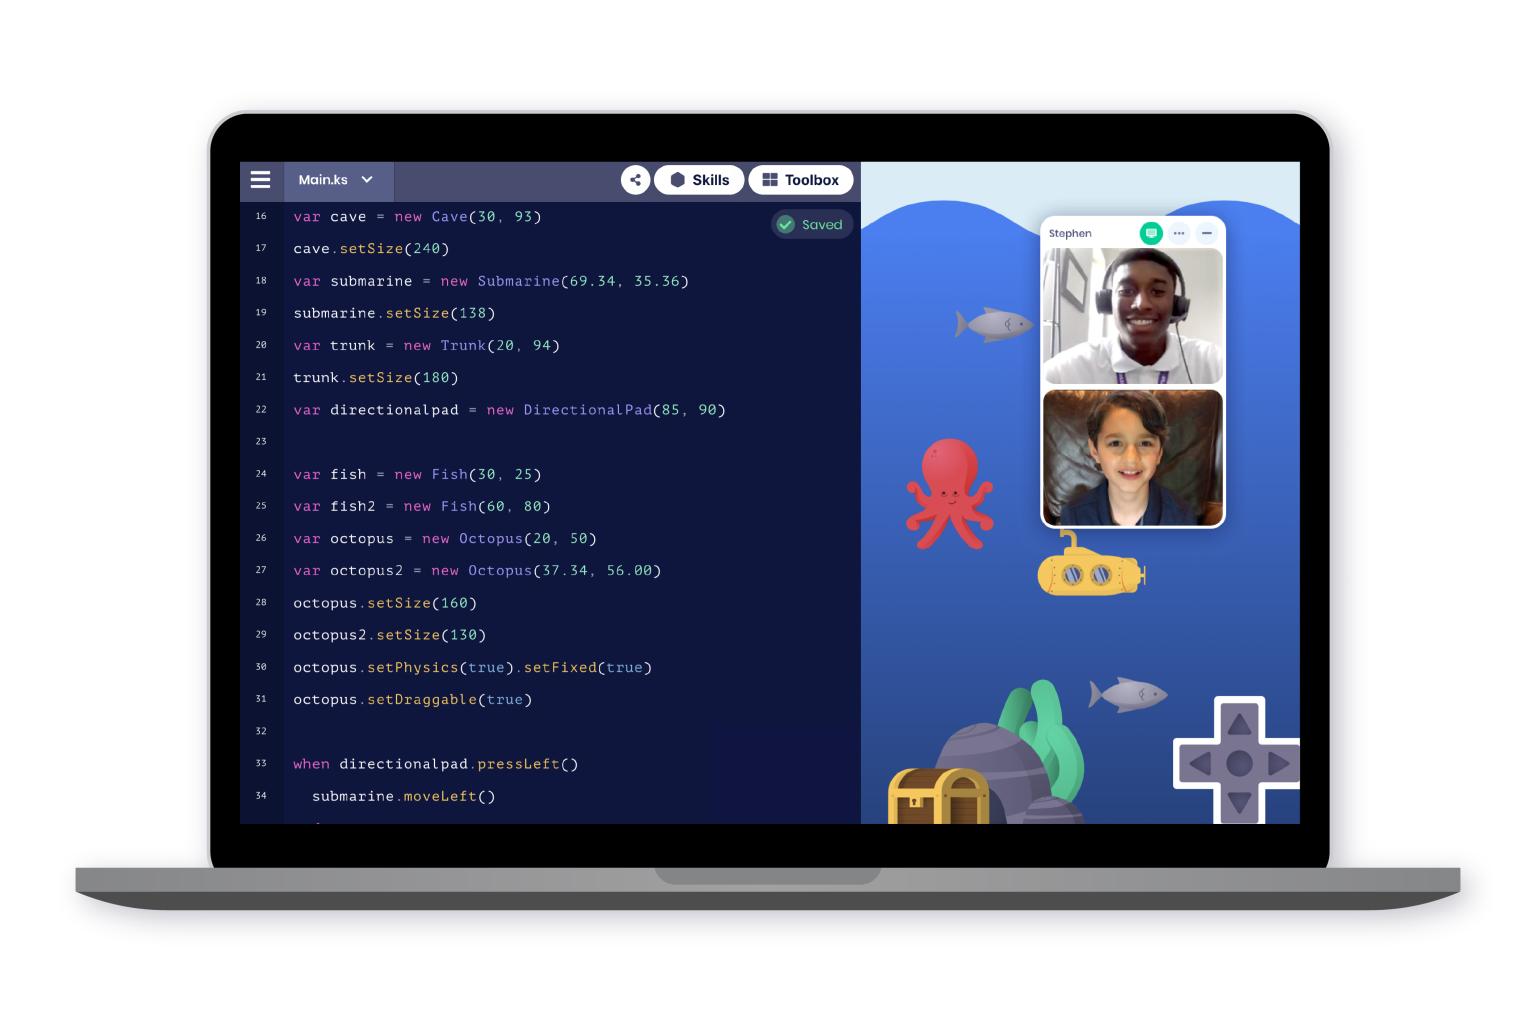 Codeverse Gets Acquired by Nerdy, Offers Courses to School Districts 